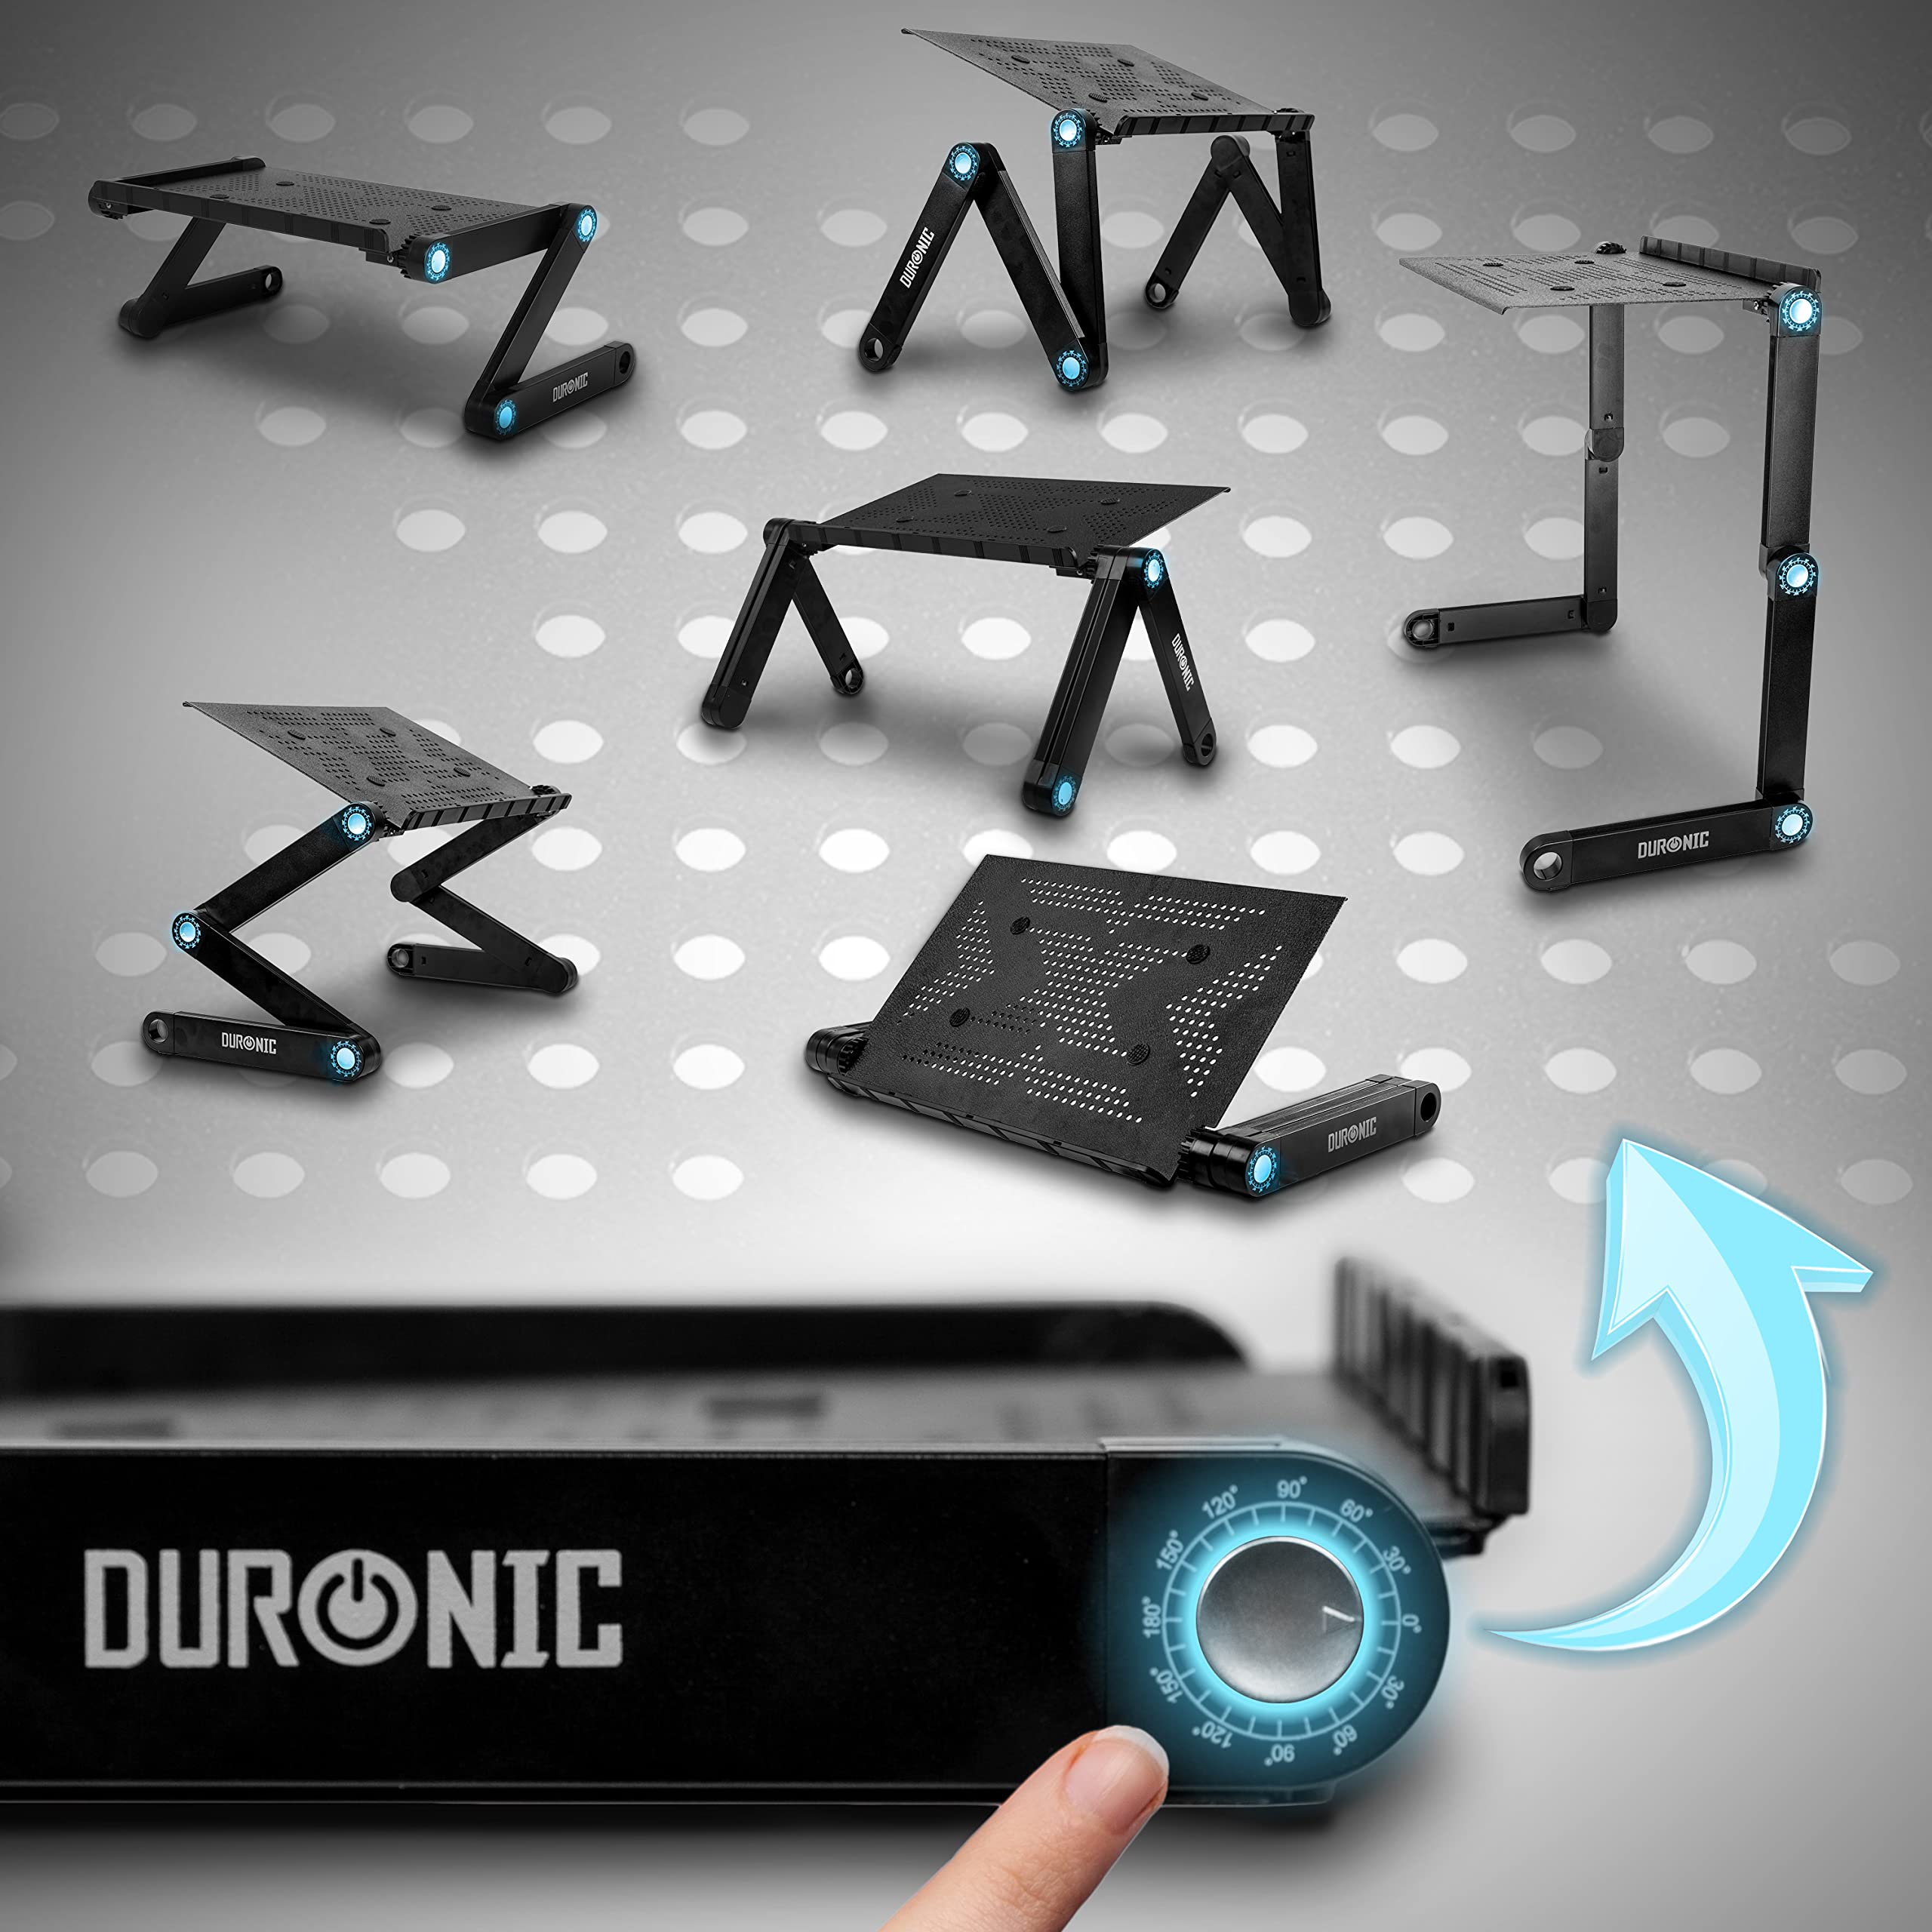 Duronic Laptop Stand DML121 | Multi-use Folding Desk Riser | Highly Adjustable | Support Tray for Tablet Or MacBook | Ergonomic | Folds Flat | Portable Table | 6 Leg Joints Each Adjust In 24 places…